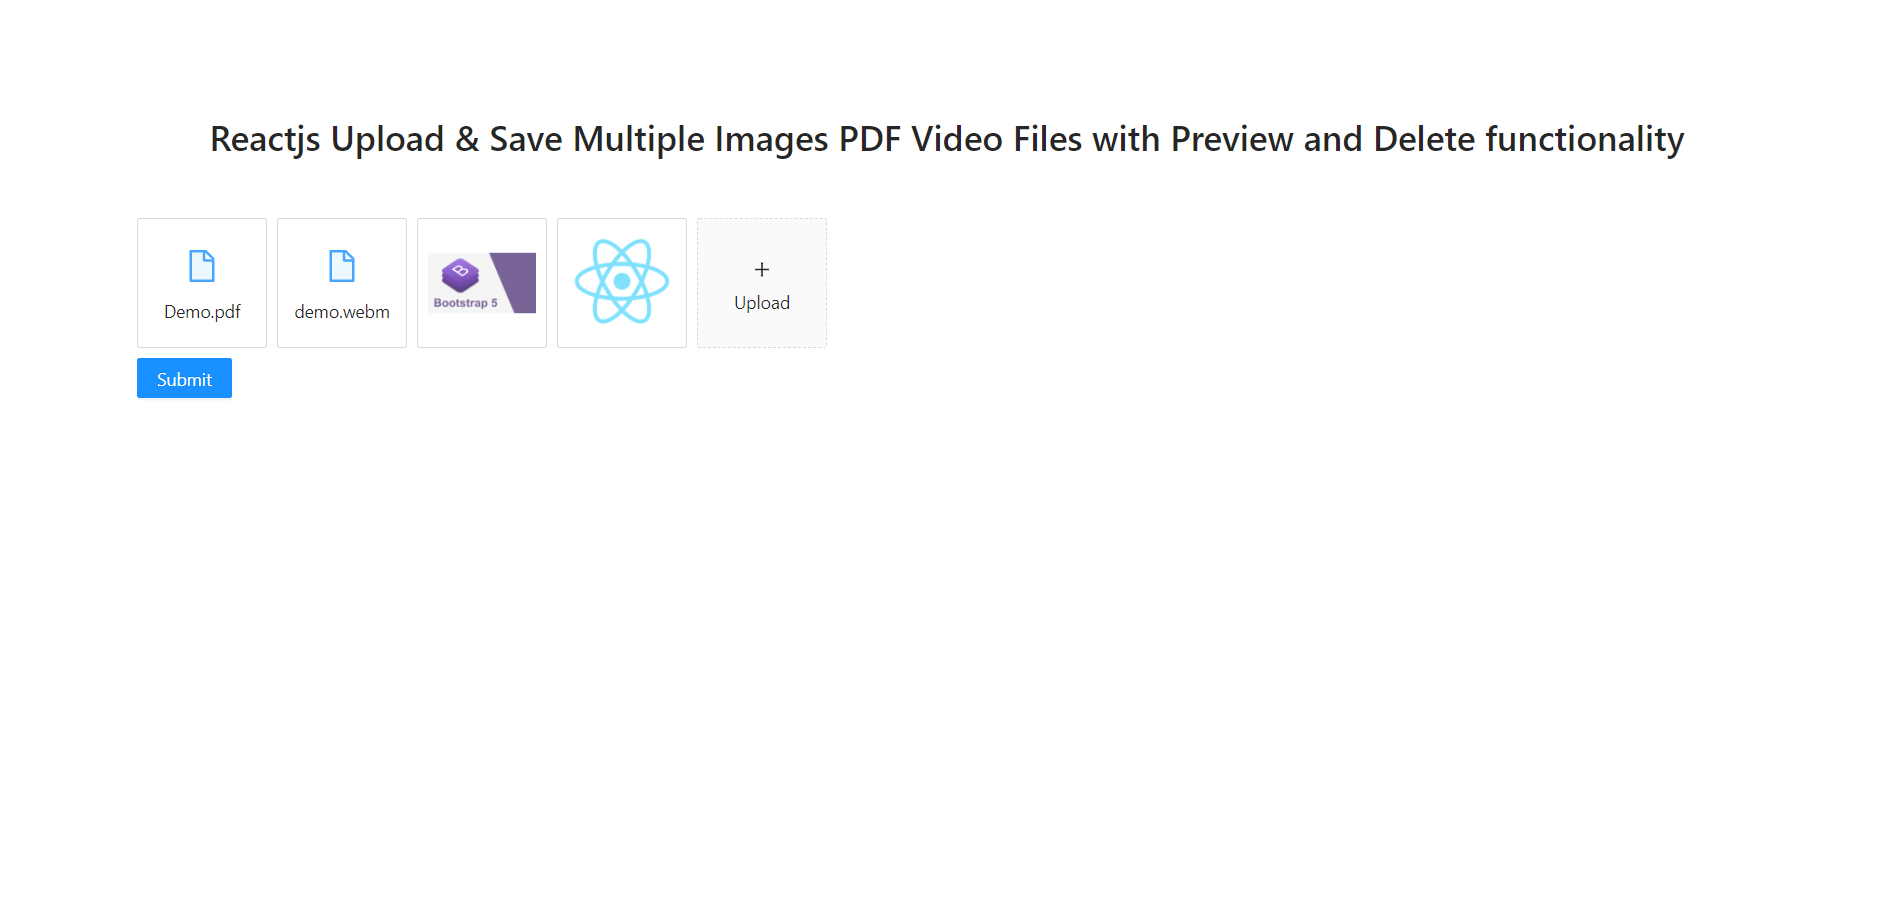 Reactjs Upload & Save Multiple Images PDF Video Files with Preview and Delete functionality